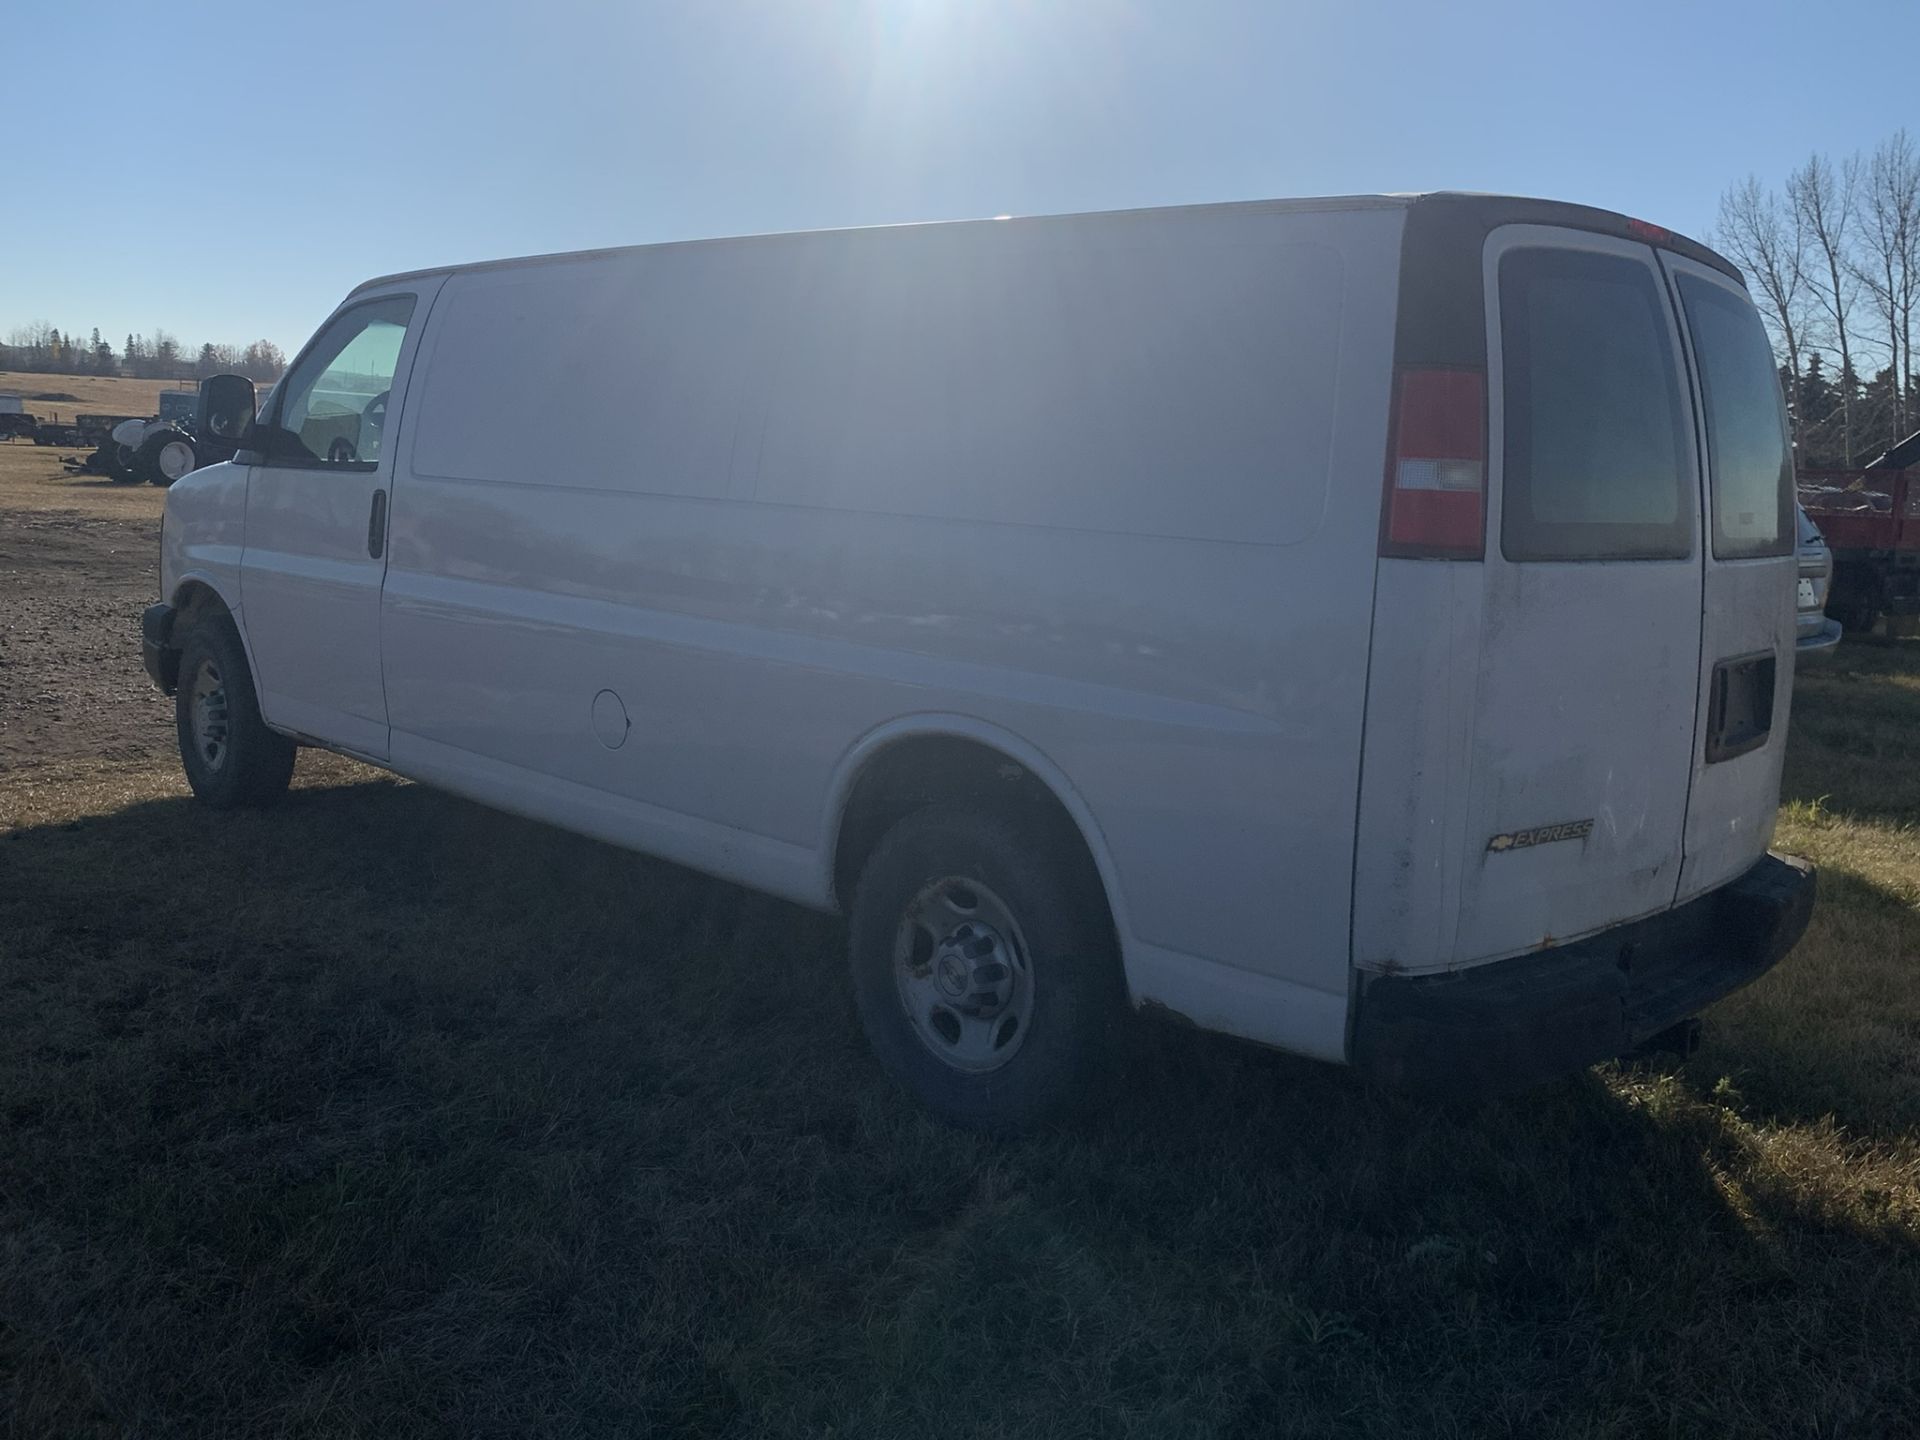 2007 CHEVROLET EXPRESS 2500 CARGO VAN , 2WD, 4.8L LR4 GAS ENG., 266,297 KMS SHOWING - Image 5 of 12